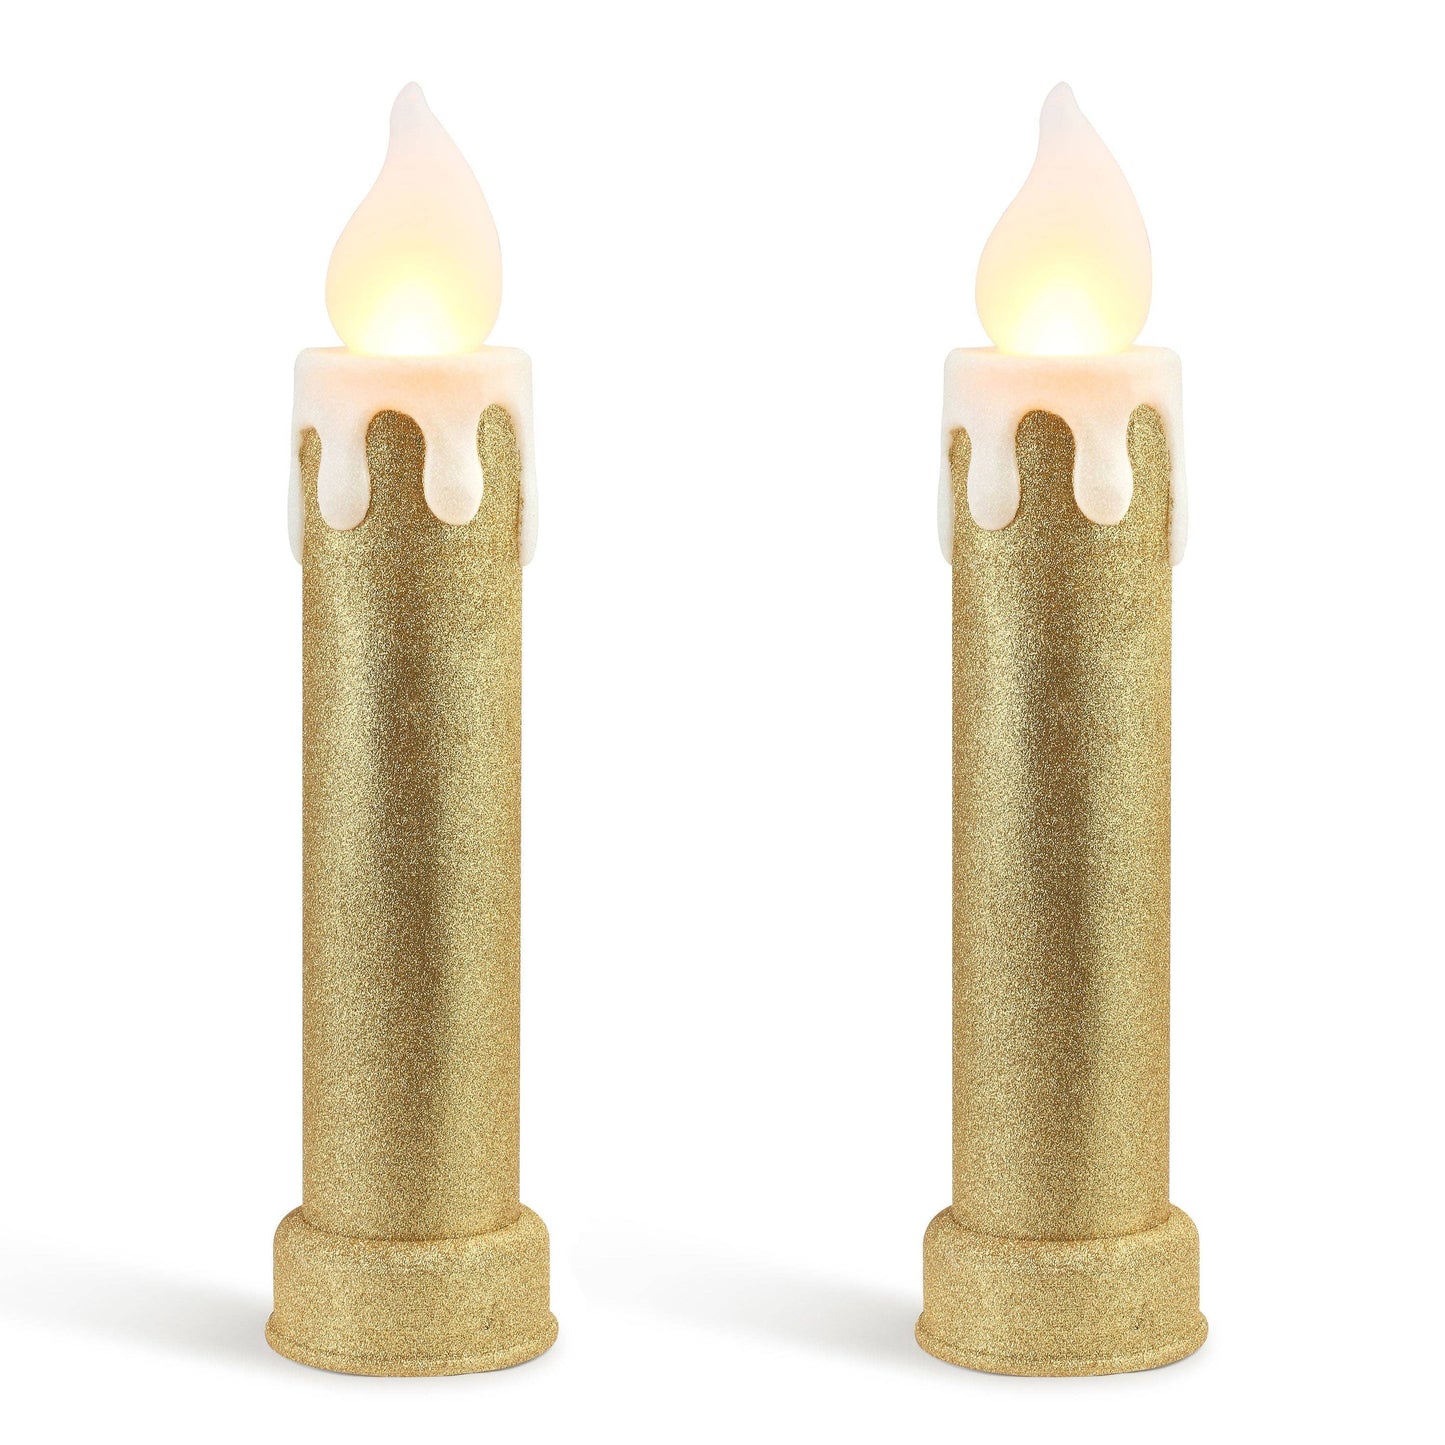 Mr. Christmas - 24" Glitter Blow Mold Candle - Set of 2 Gold